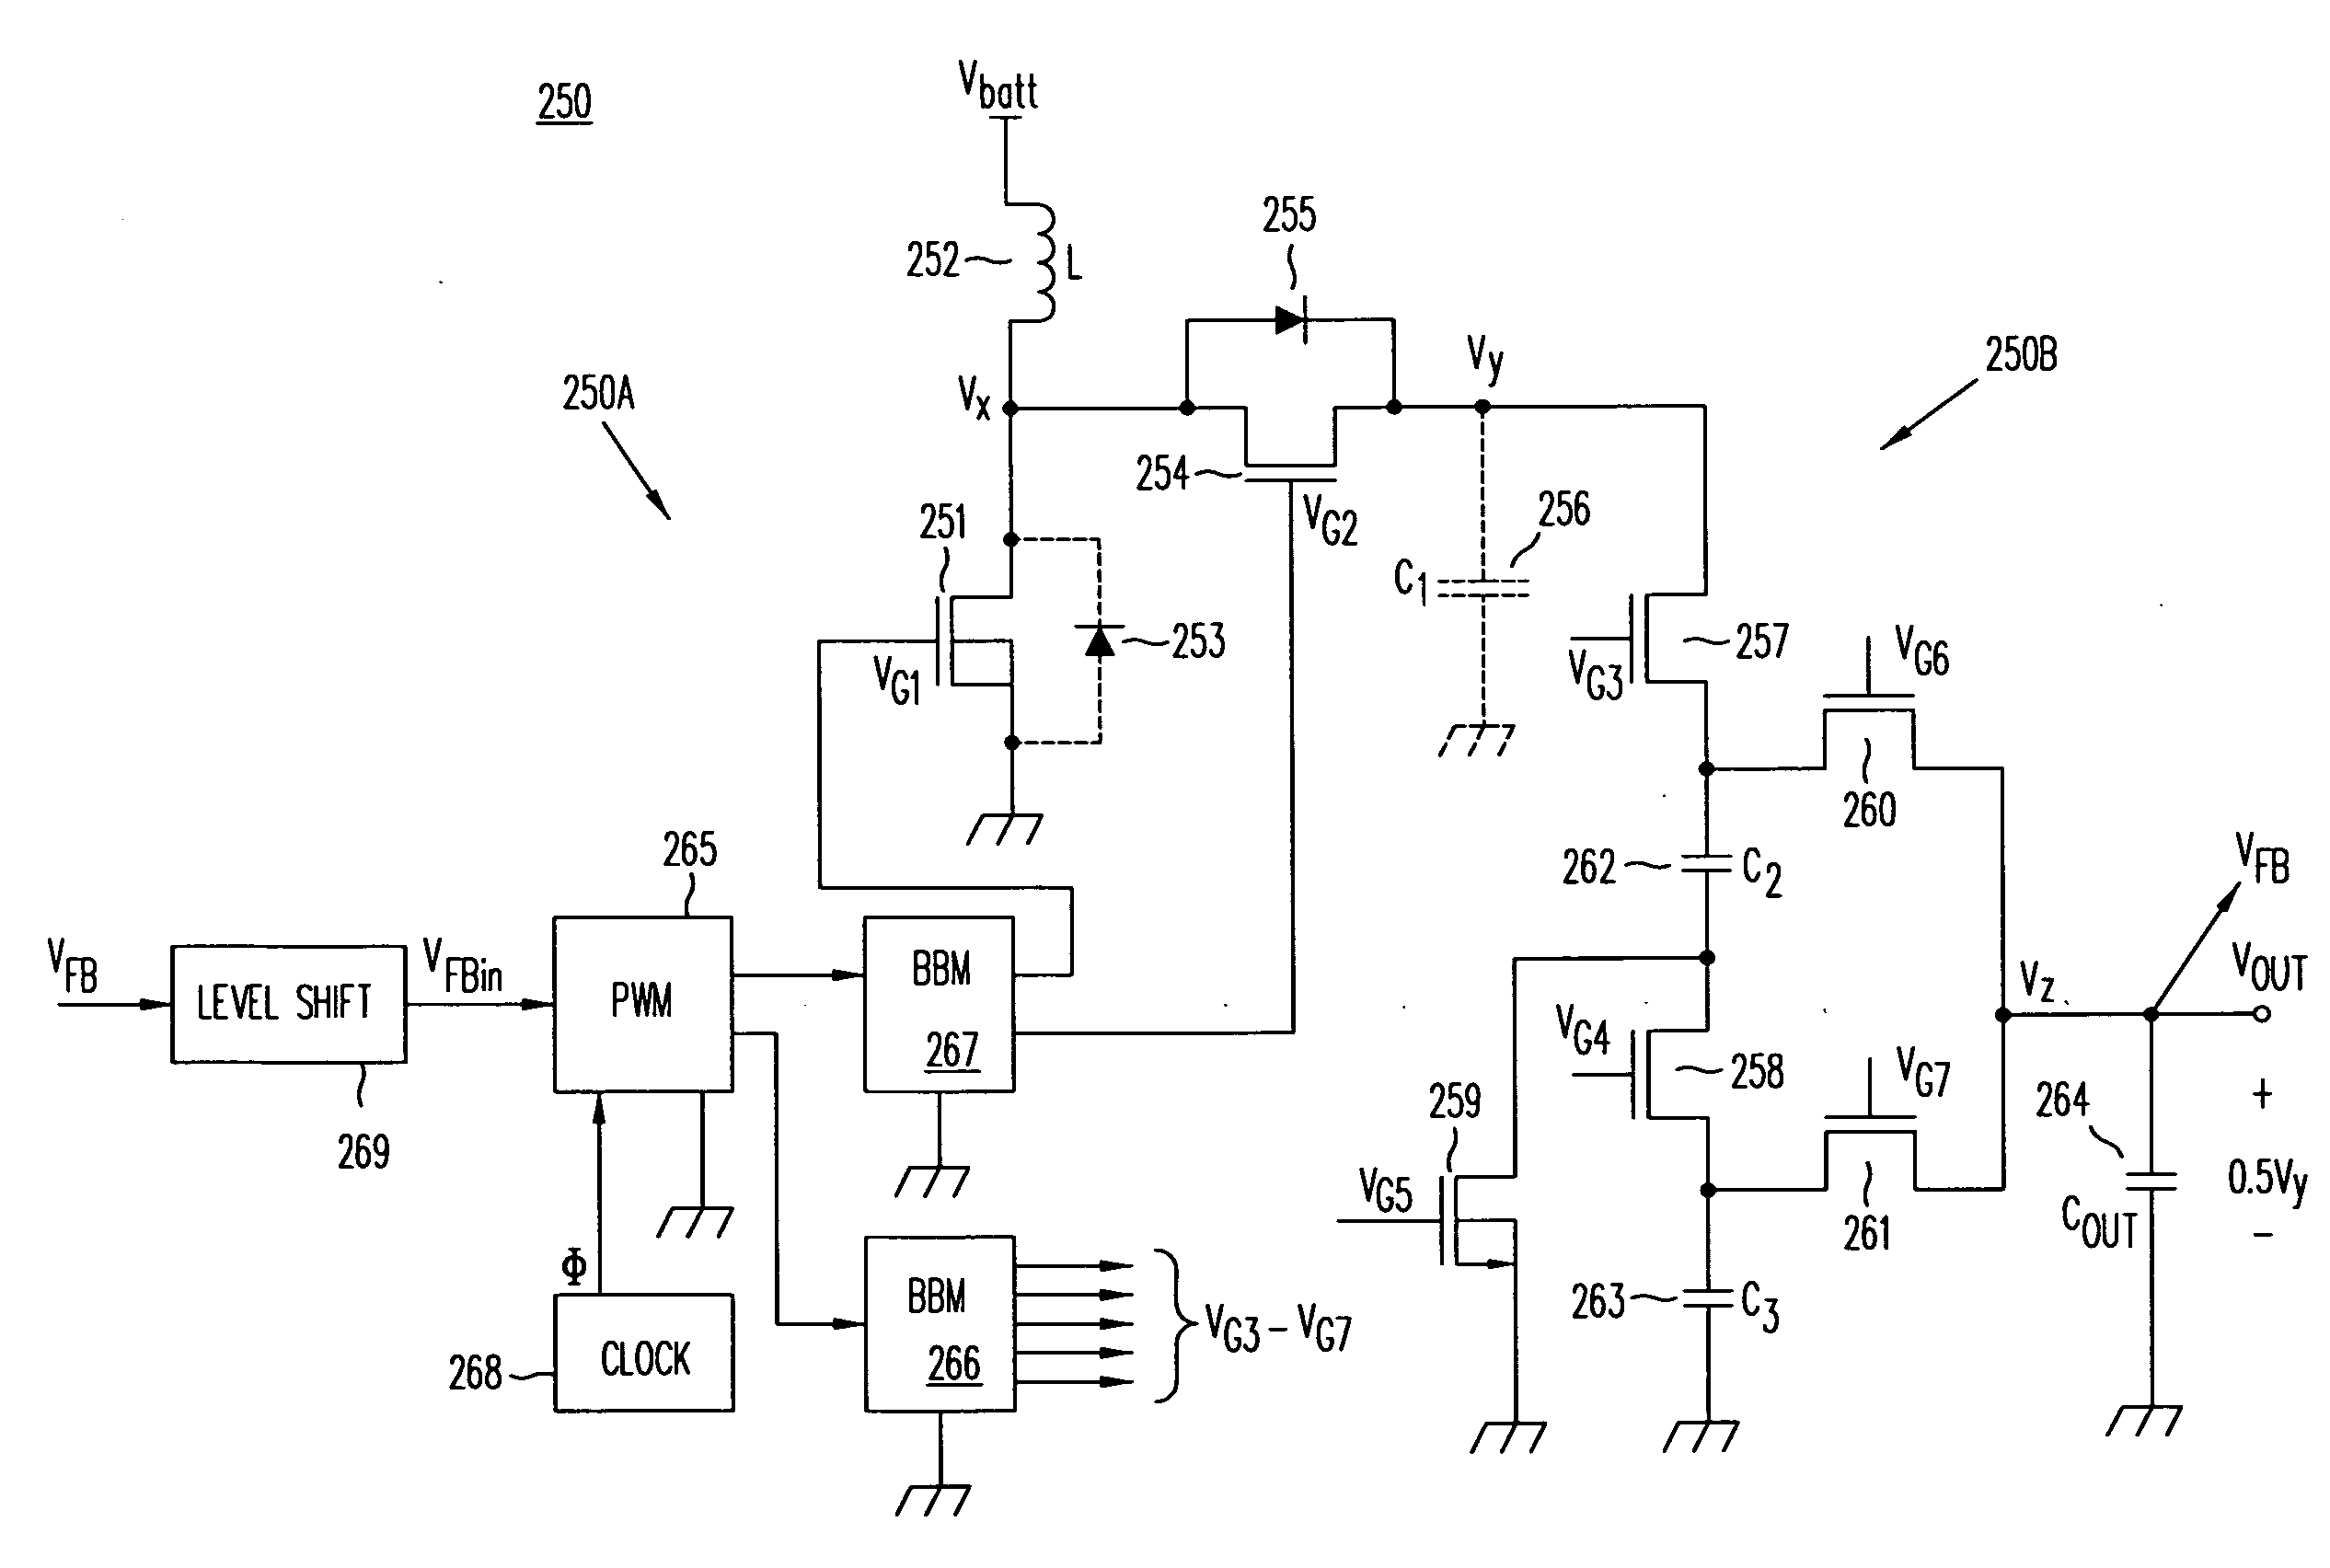 High-efficiency DC/DC voltage converter including up inductive switching pre-regulator and capacitive switching post-converter